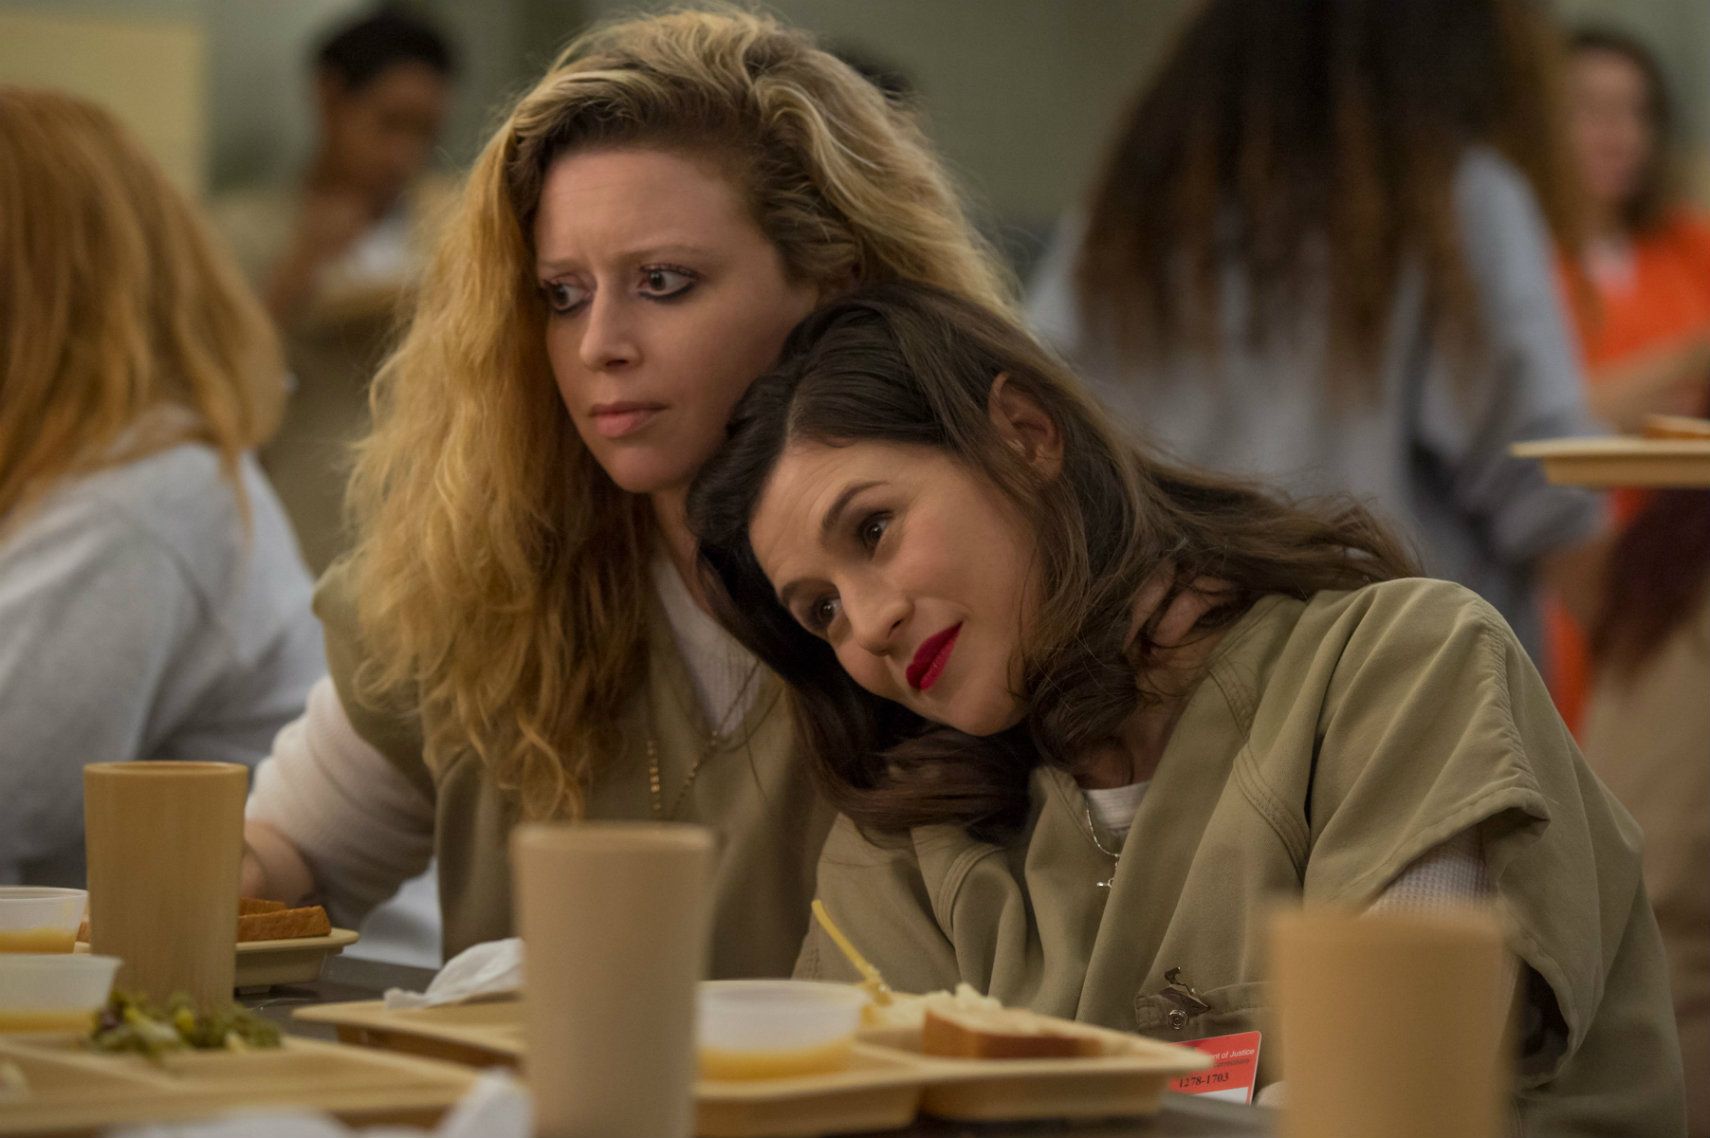 5 Of The Best Relationships On Orange Is The New Black (And 5 Of The Worst)